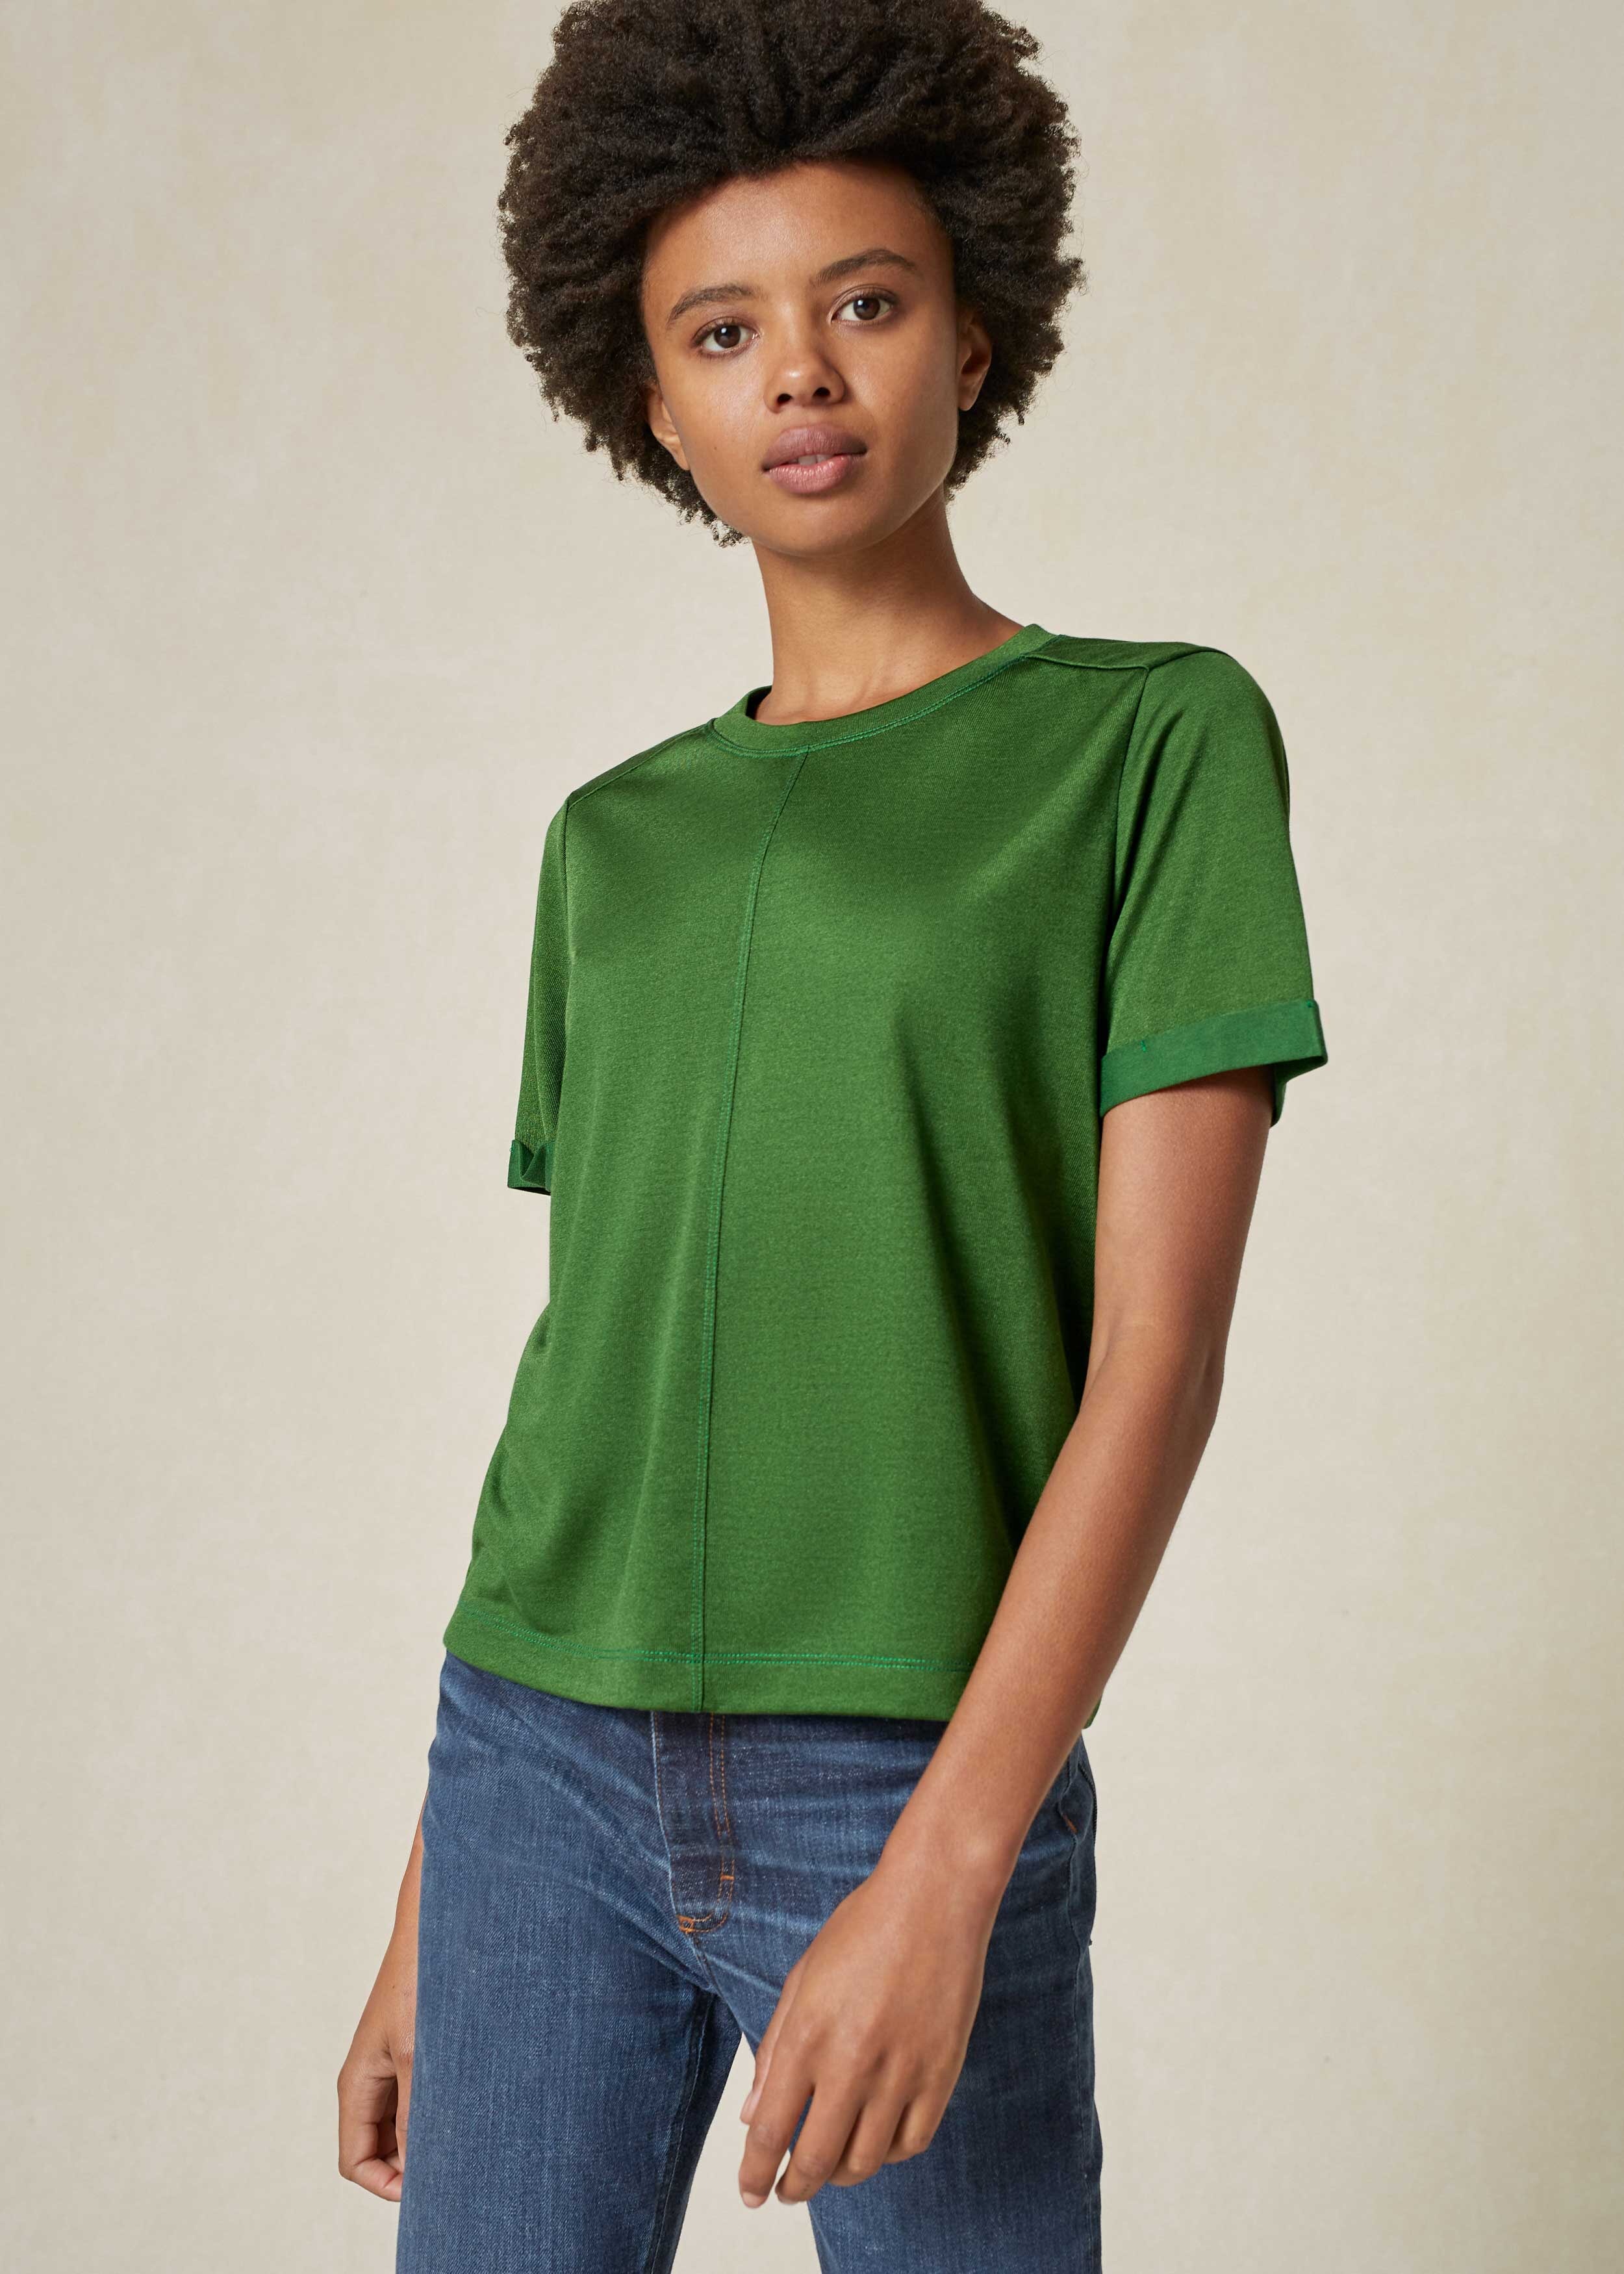 AM-PM Luxe Boxy Top Leaf Green